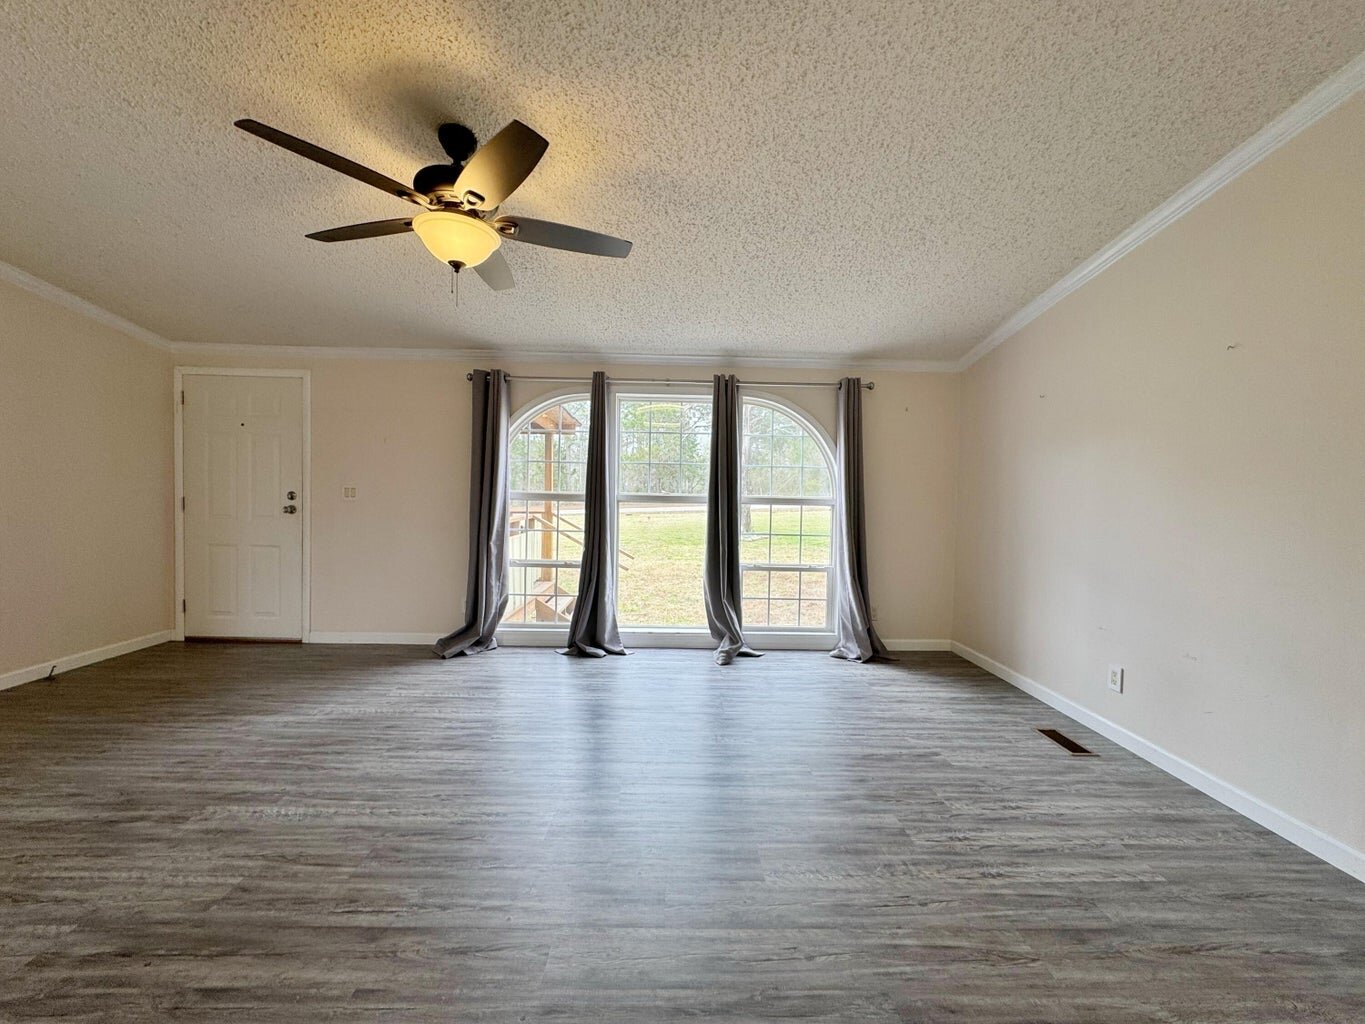 Check out the beautiful interior of 14545 AR-124! 🏡✨ 

This charming and affordable Russellville home is ready and waiting for its new owners to move in and add their personal touch. Boasting a split floor plan, two generous living areas, and a mode